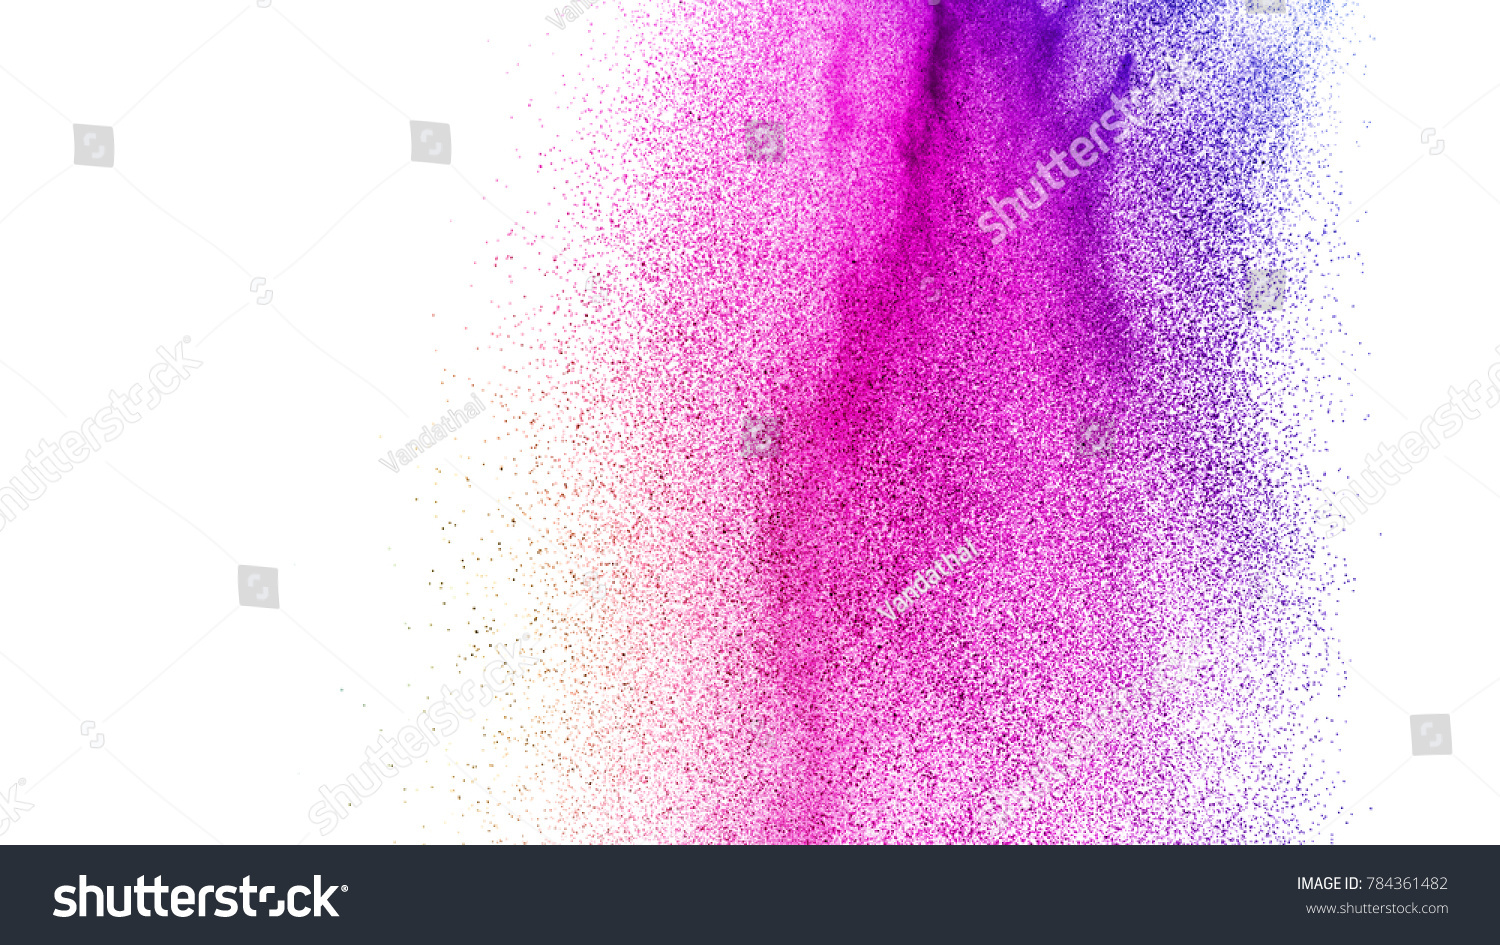 abstract pink dust explosion on  white background. abstract pink powder splattered on white  background, Freeze motion of pink powder exploding. #784361482